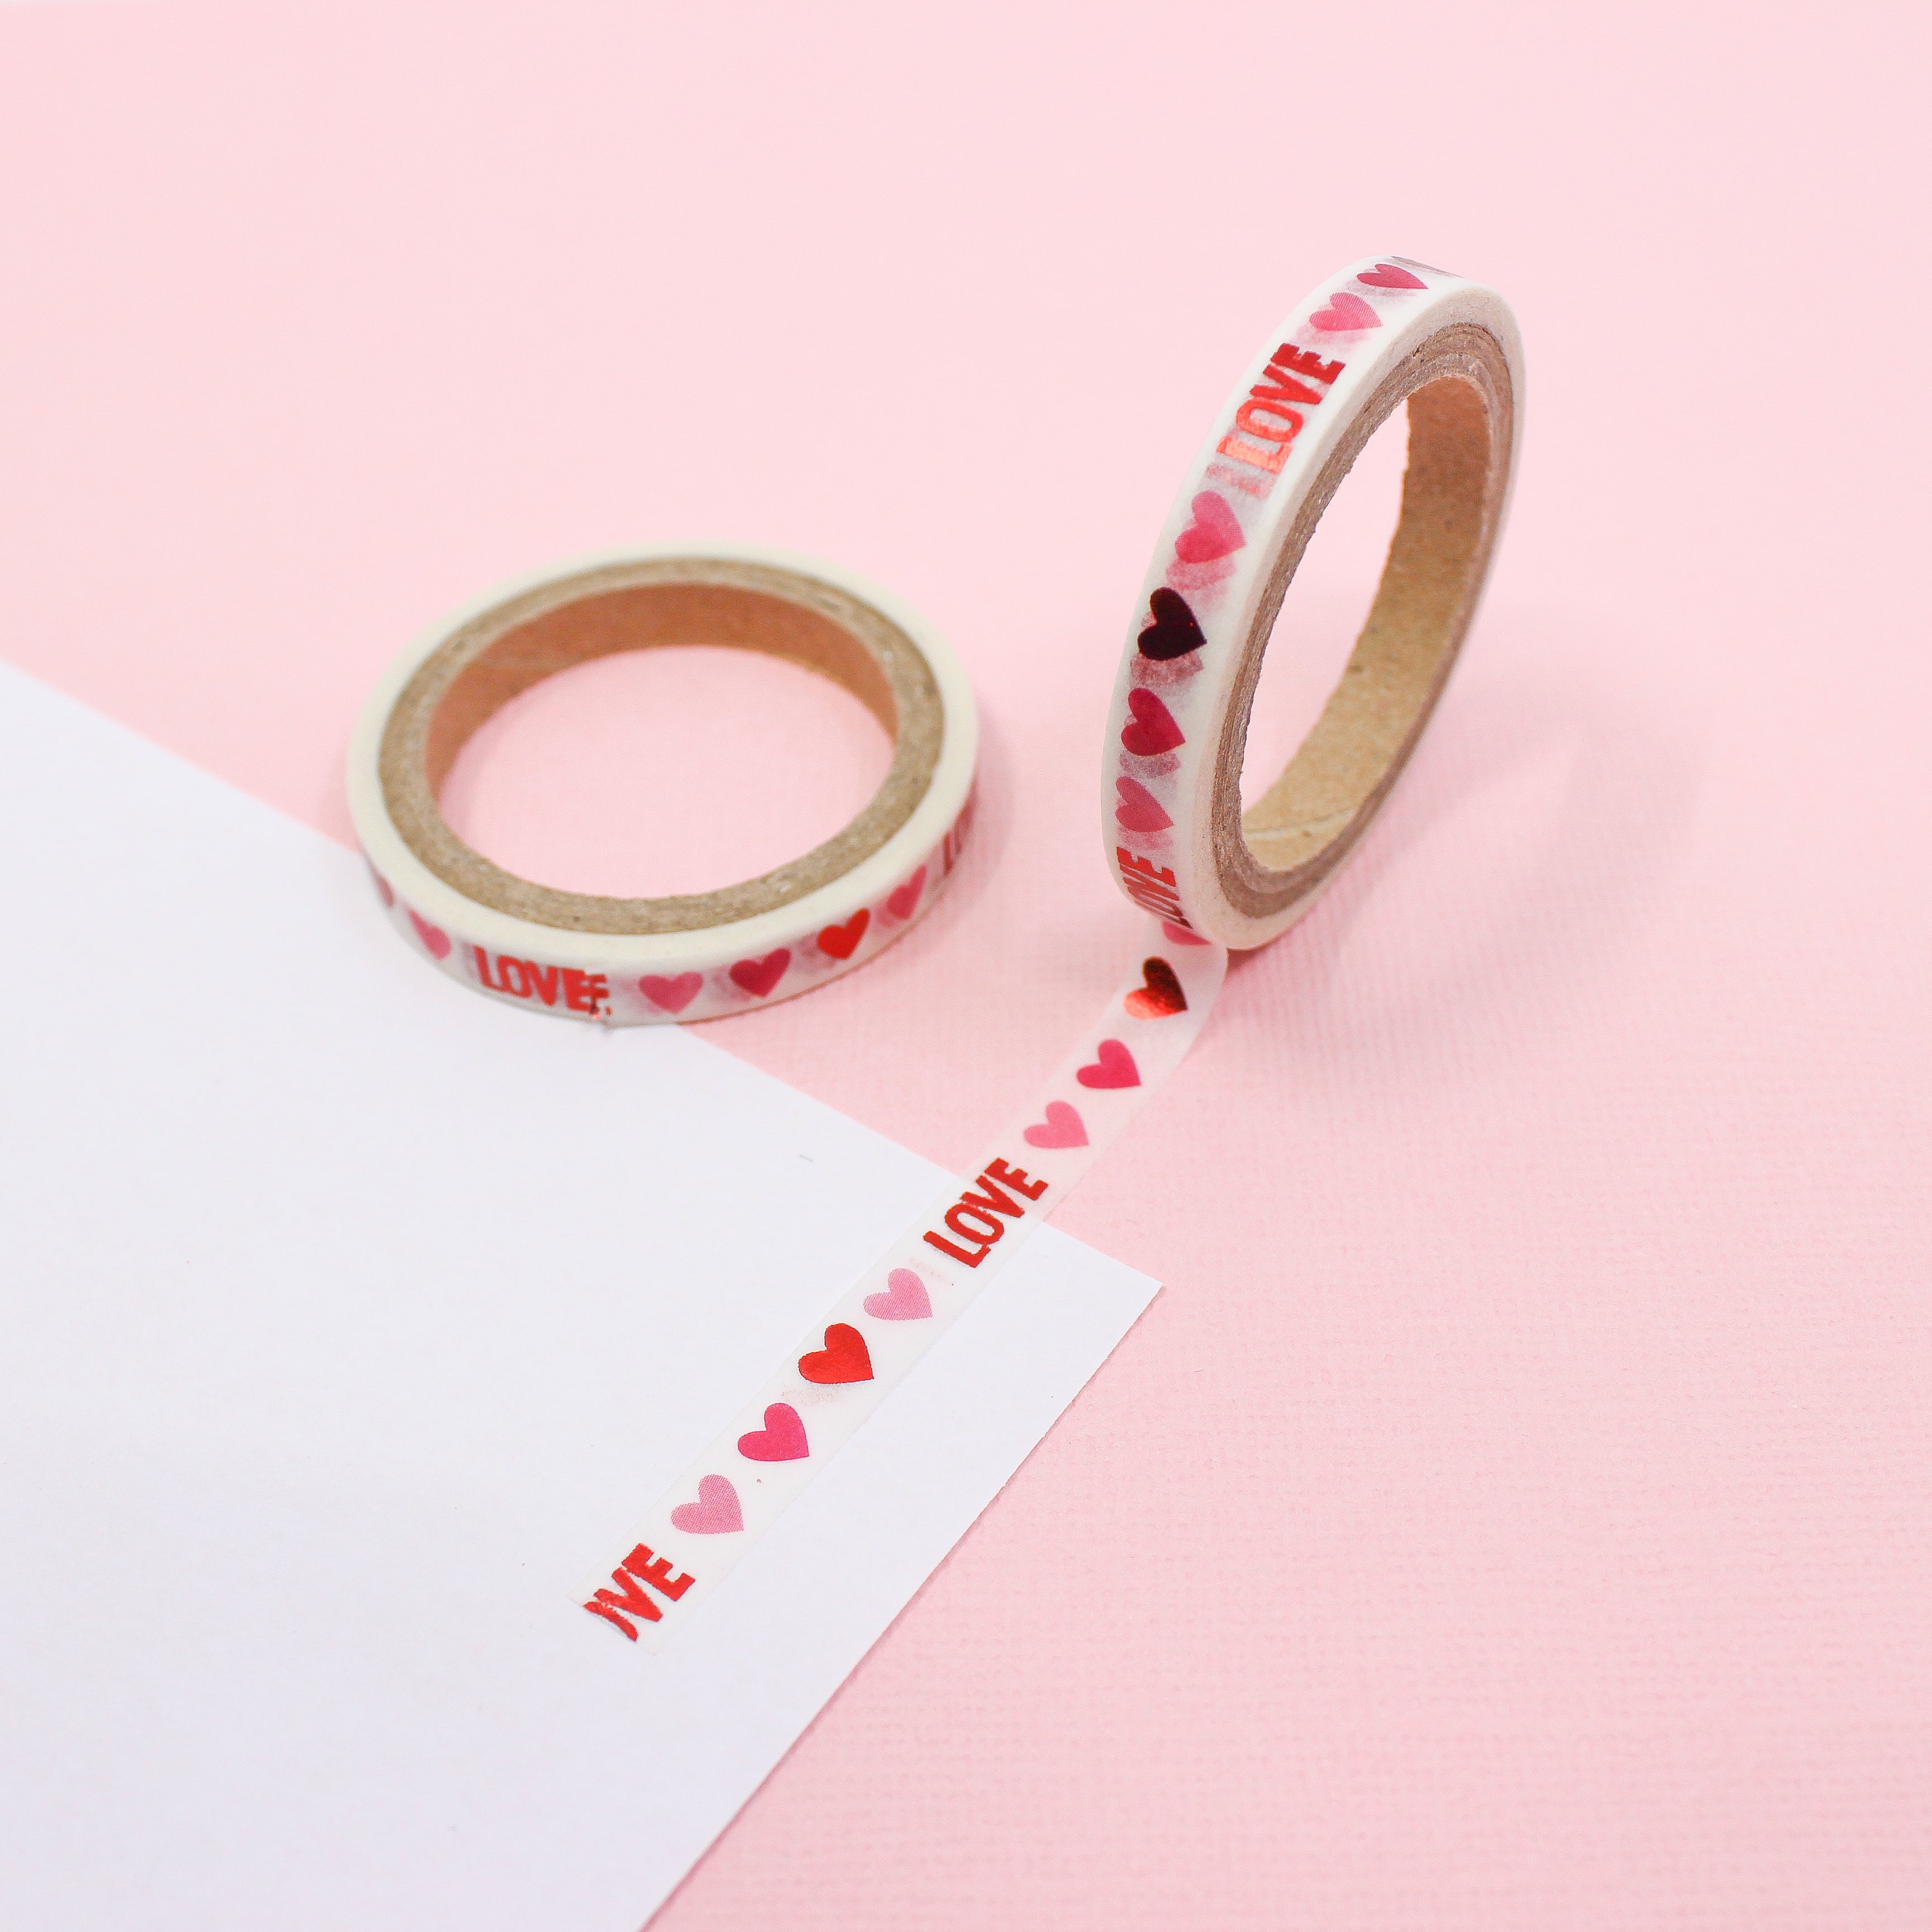 This is a love foil multi color red heart with white background themed washi tape from BBB Supplies Craft Shop